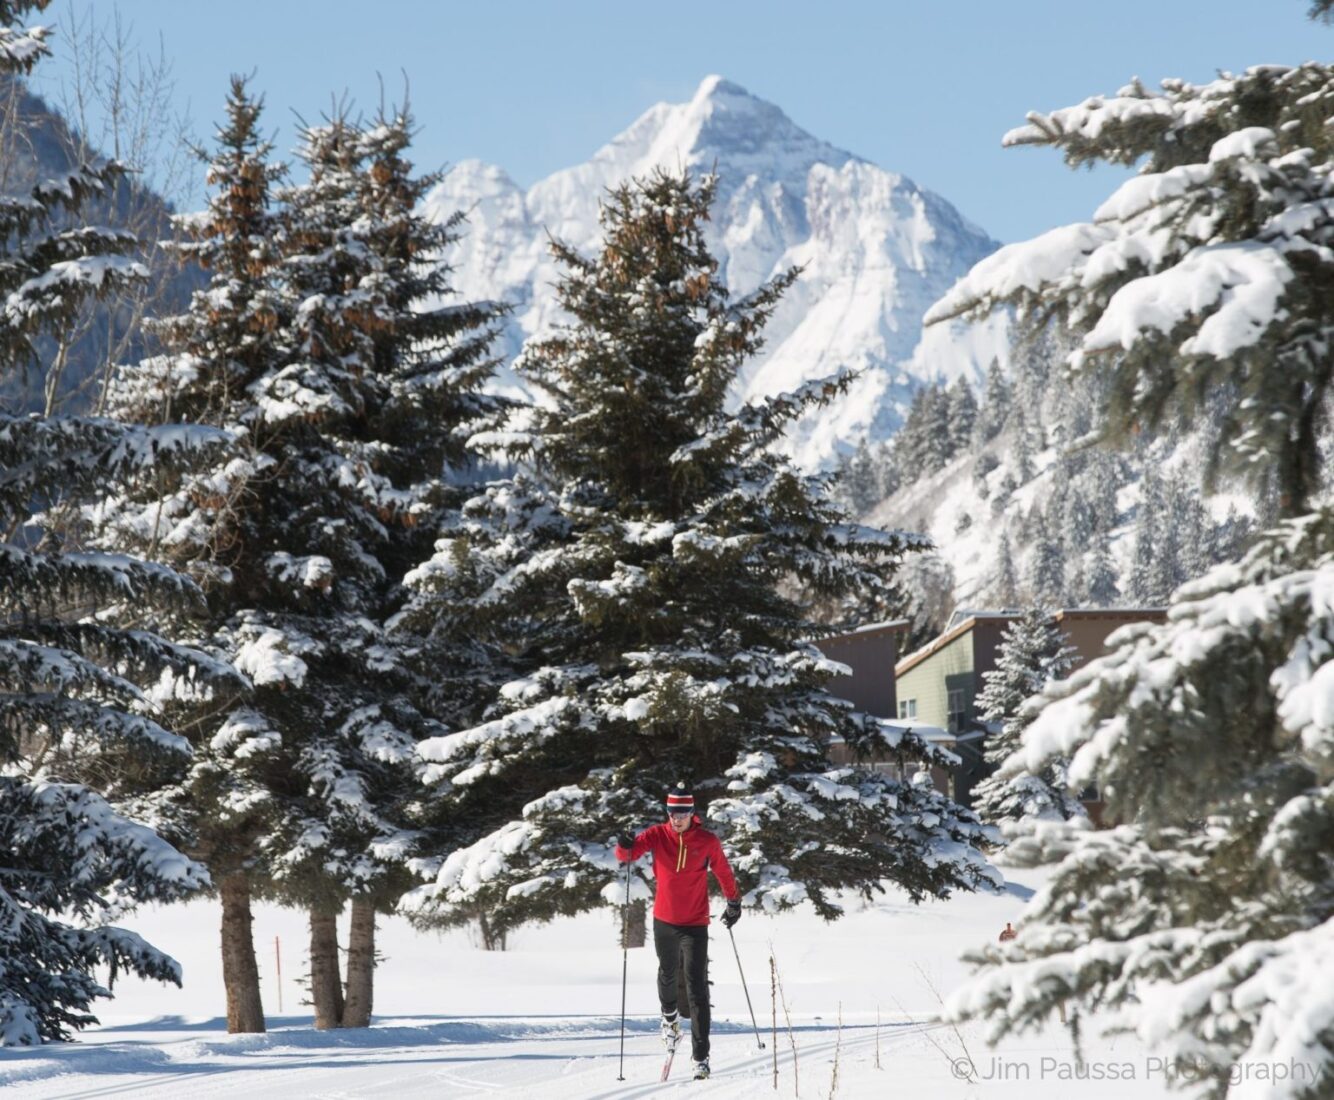 Cross-country skiing on the Aspen Golf Course